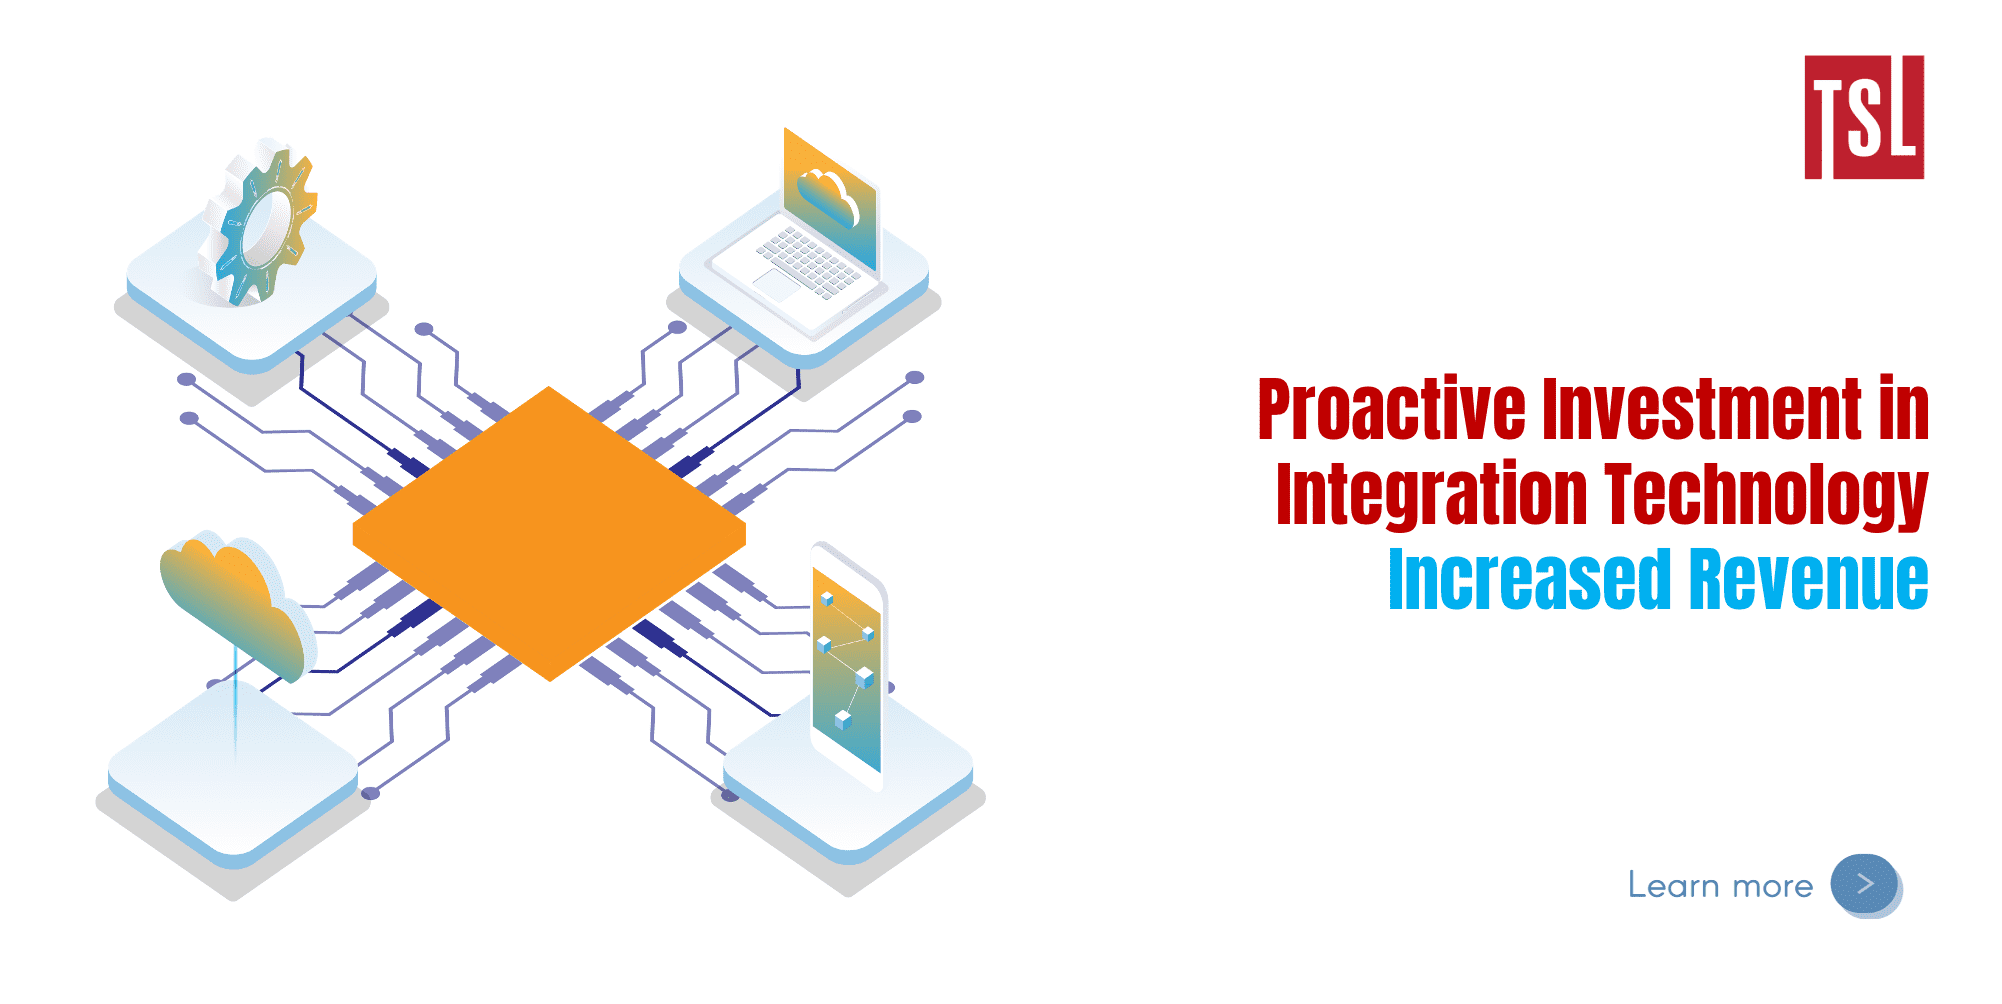 Proactive Investment in Integration Technology Increased Revenue